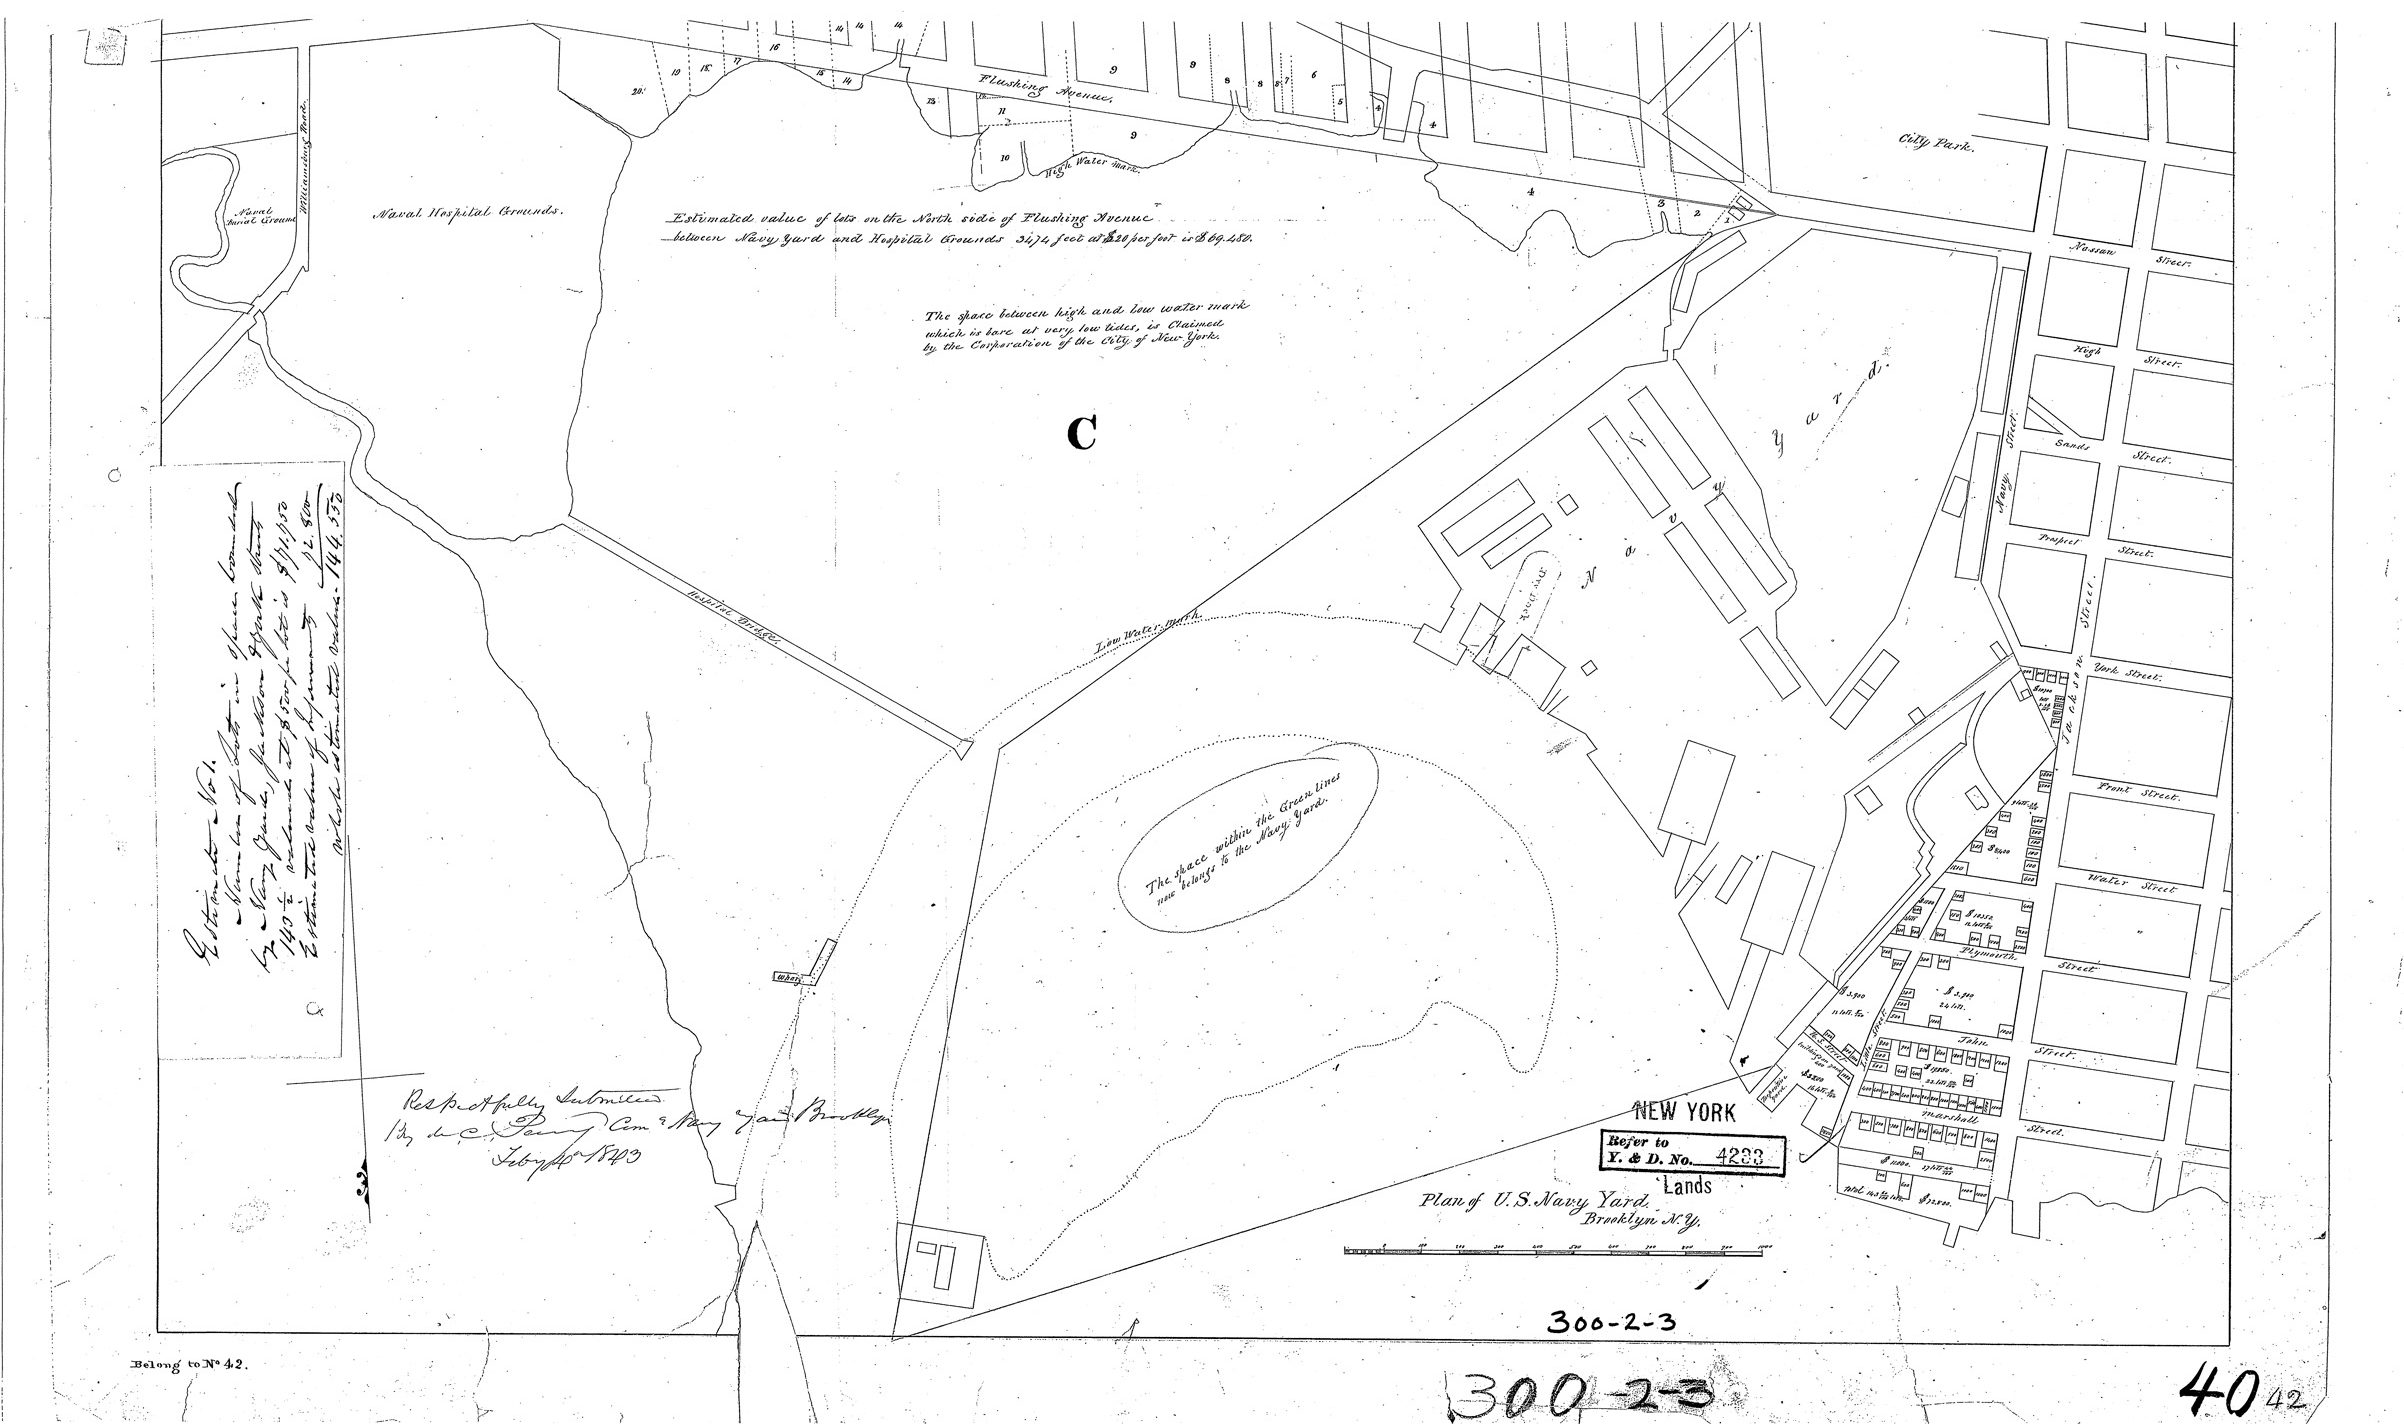 Line drawing map showing the Brooklyn Navy Yard in 1843